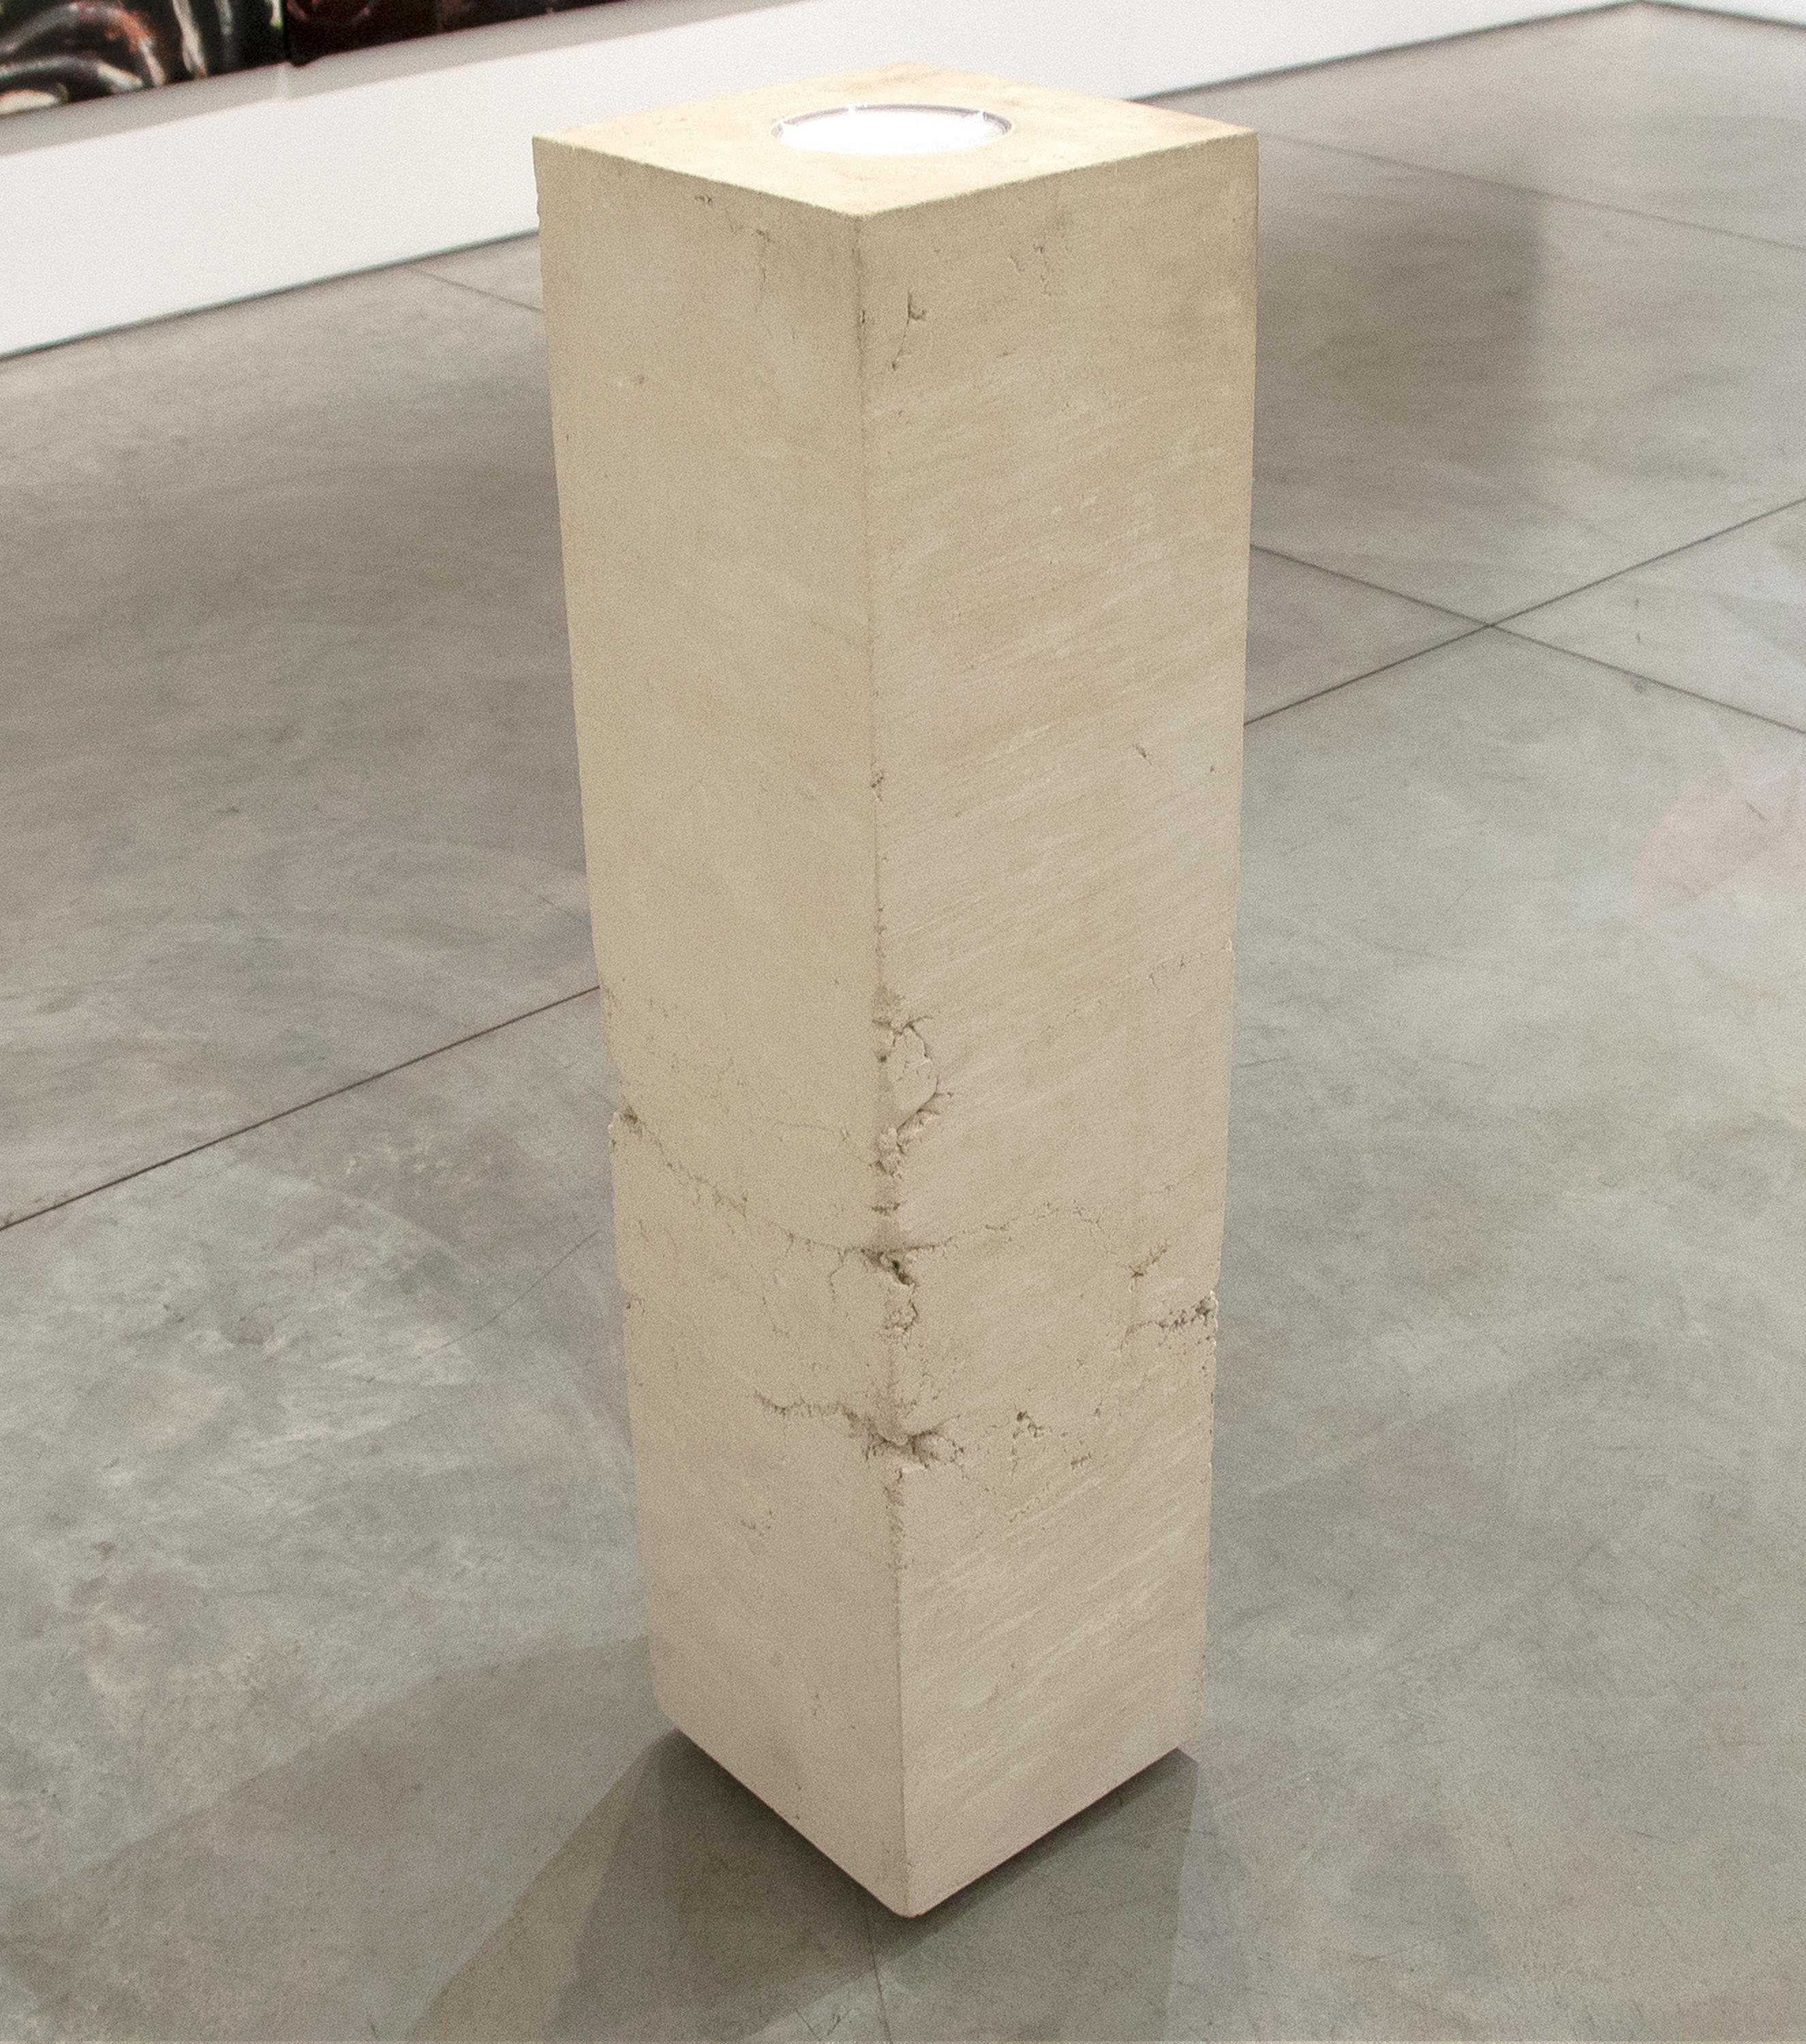 Theaster Gates Abstract Sculpture - Stand-Ins for Period of Wreckage 25